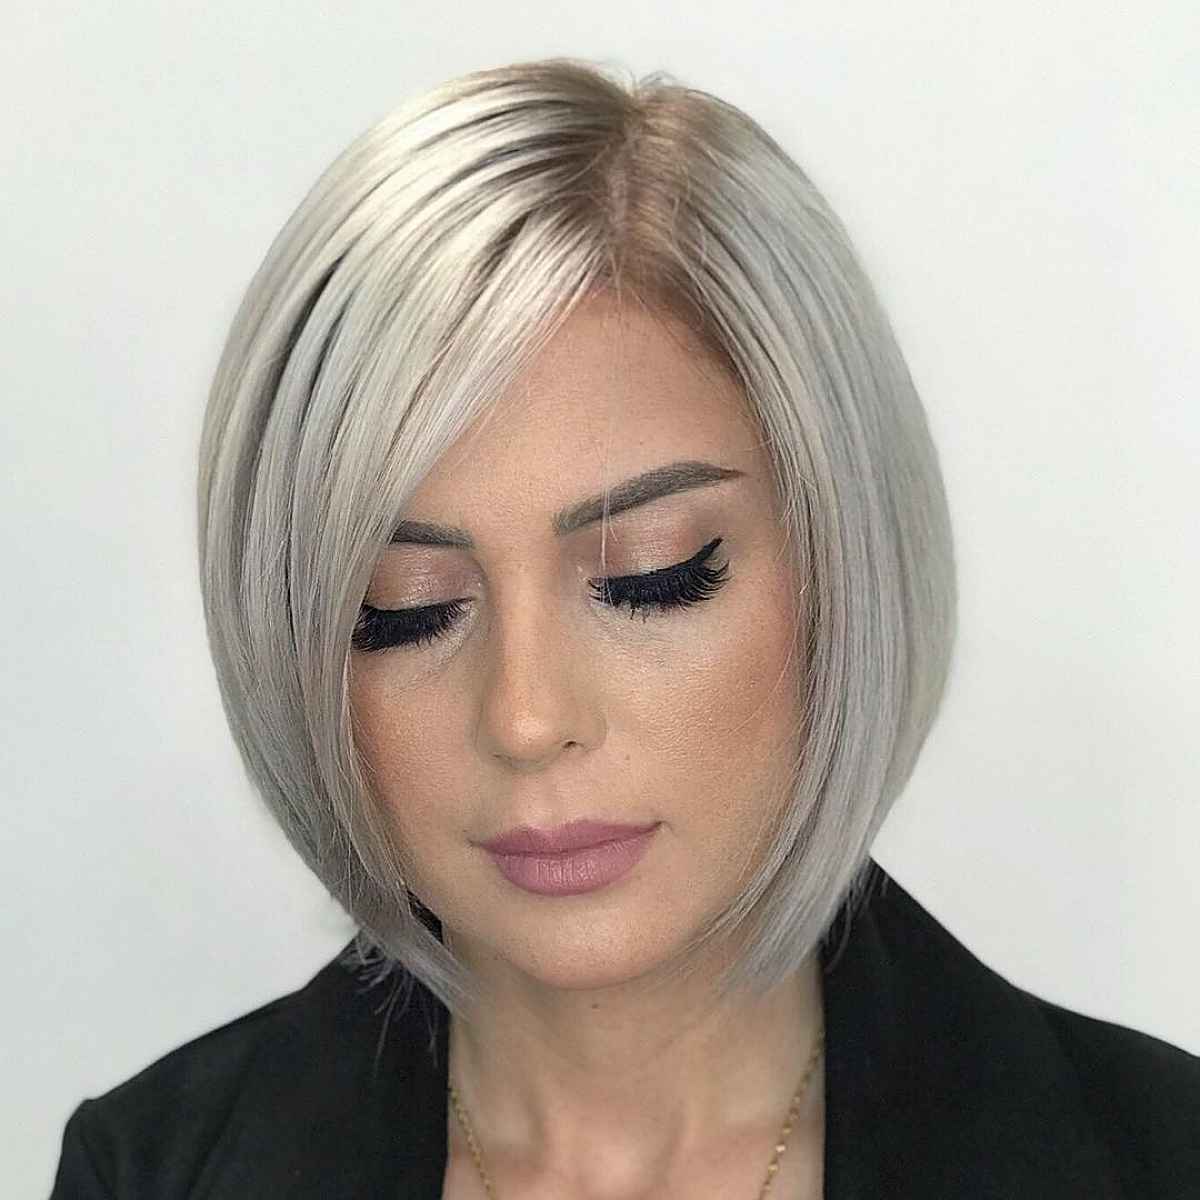 55 Straight Bob Haircut Ideas for a Simple &amp; Chic Look